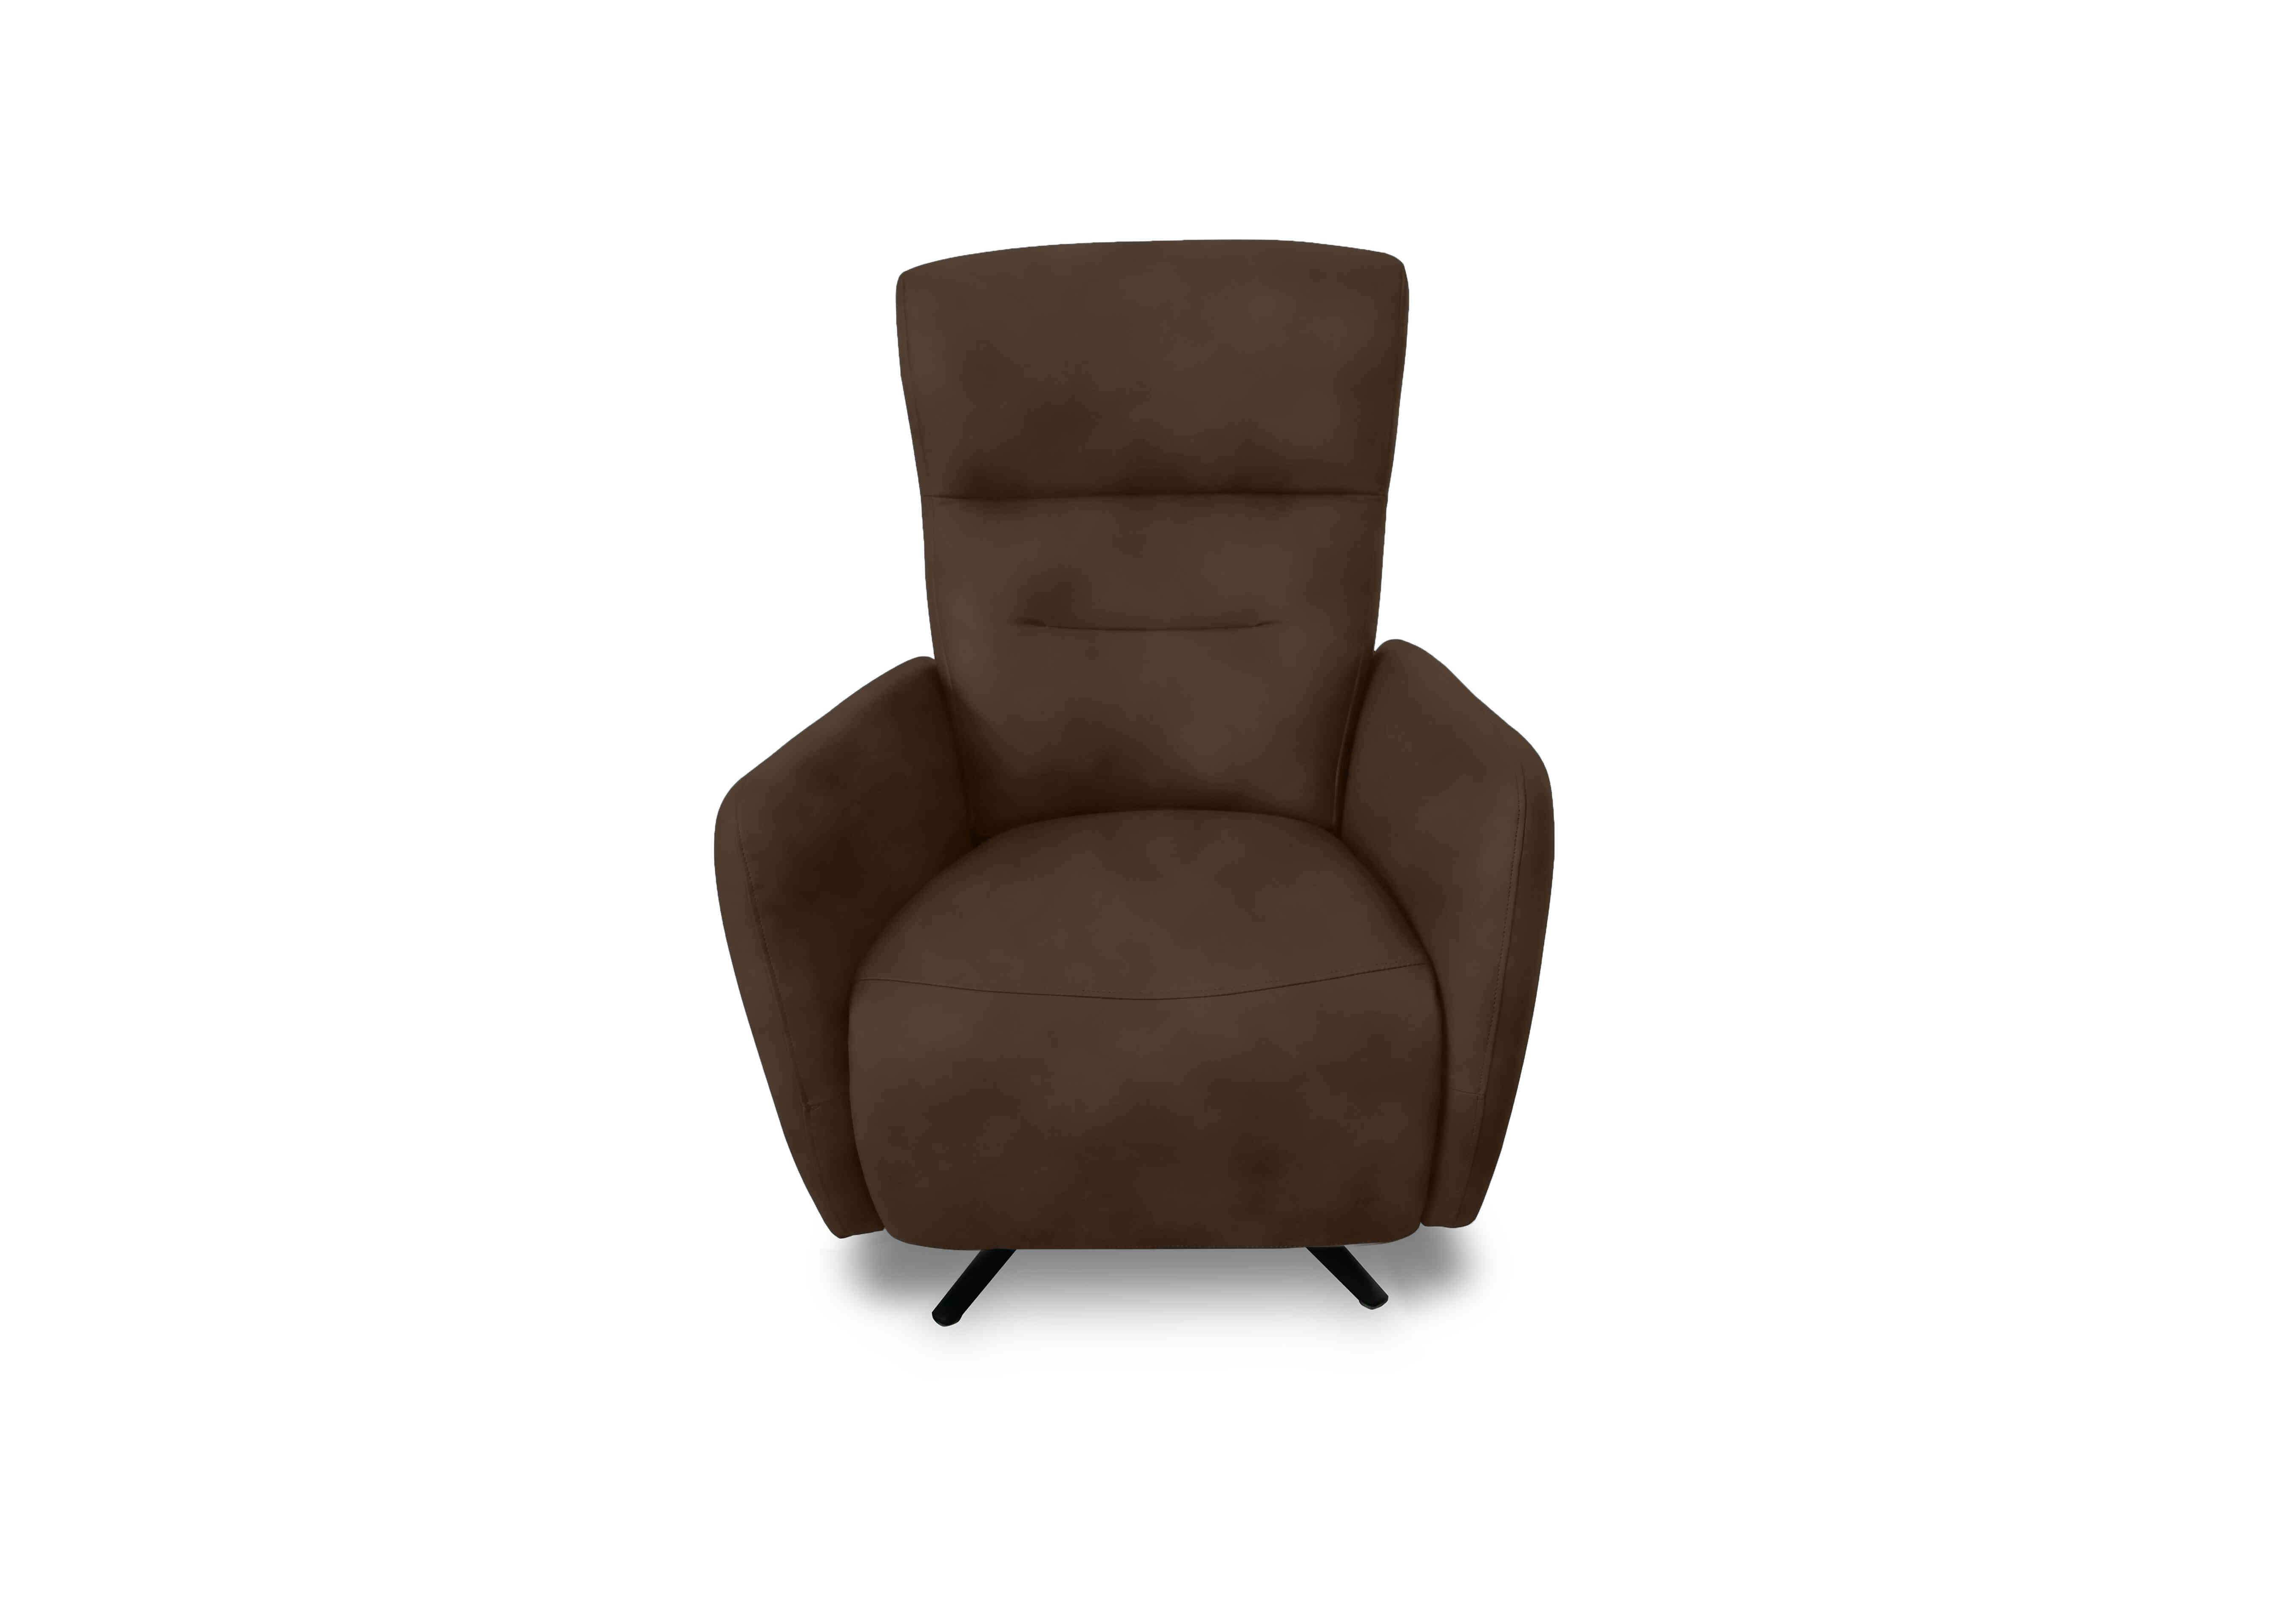 Designer Chair Collection Le Mans Fabric Dual Power Recliner Swivel Chair in Sfa-Pey-R04 Dark Chocolate on Furniture Village